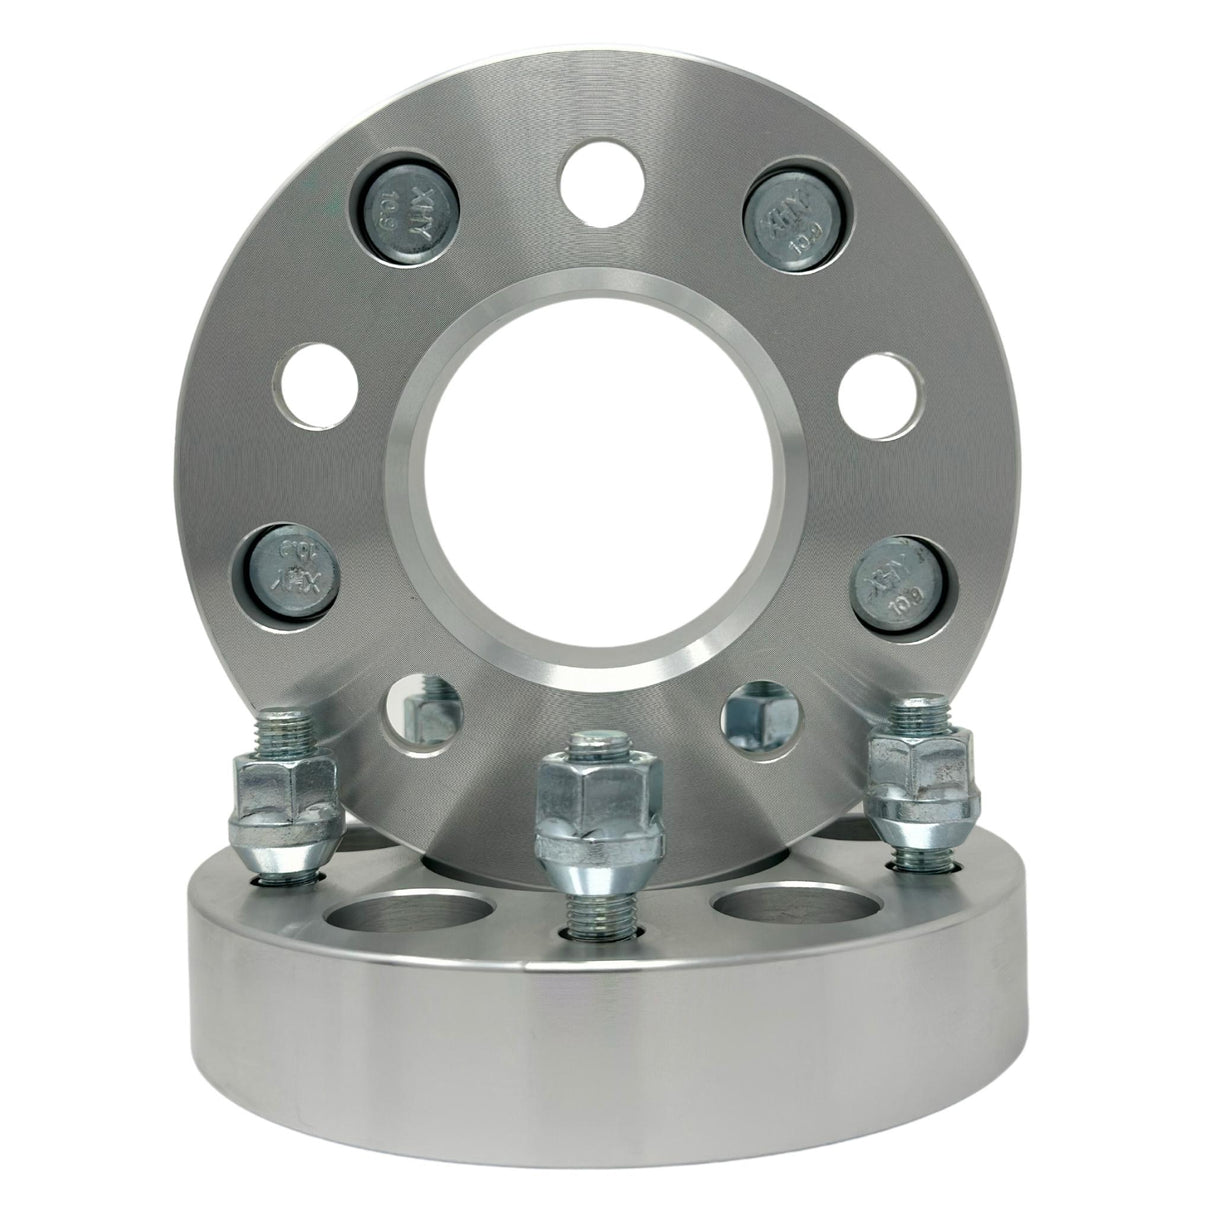 5x4.5 (5x114.3) to 5x4.75 (5x120.7) Wheel Adapters 1"-1.25"Inch (25-32mm) 12x1.5 Studs & Lug Nuts 74mm Center Bore